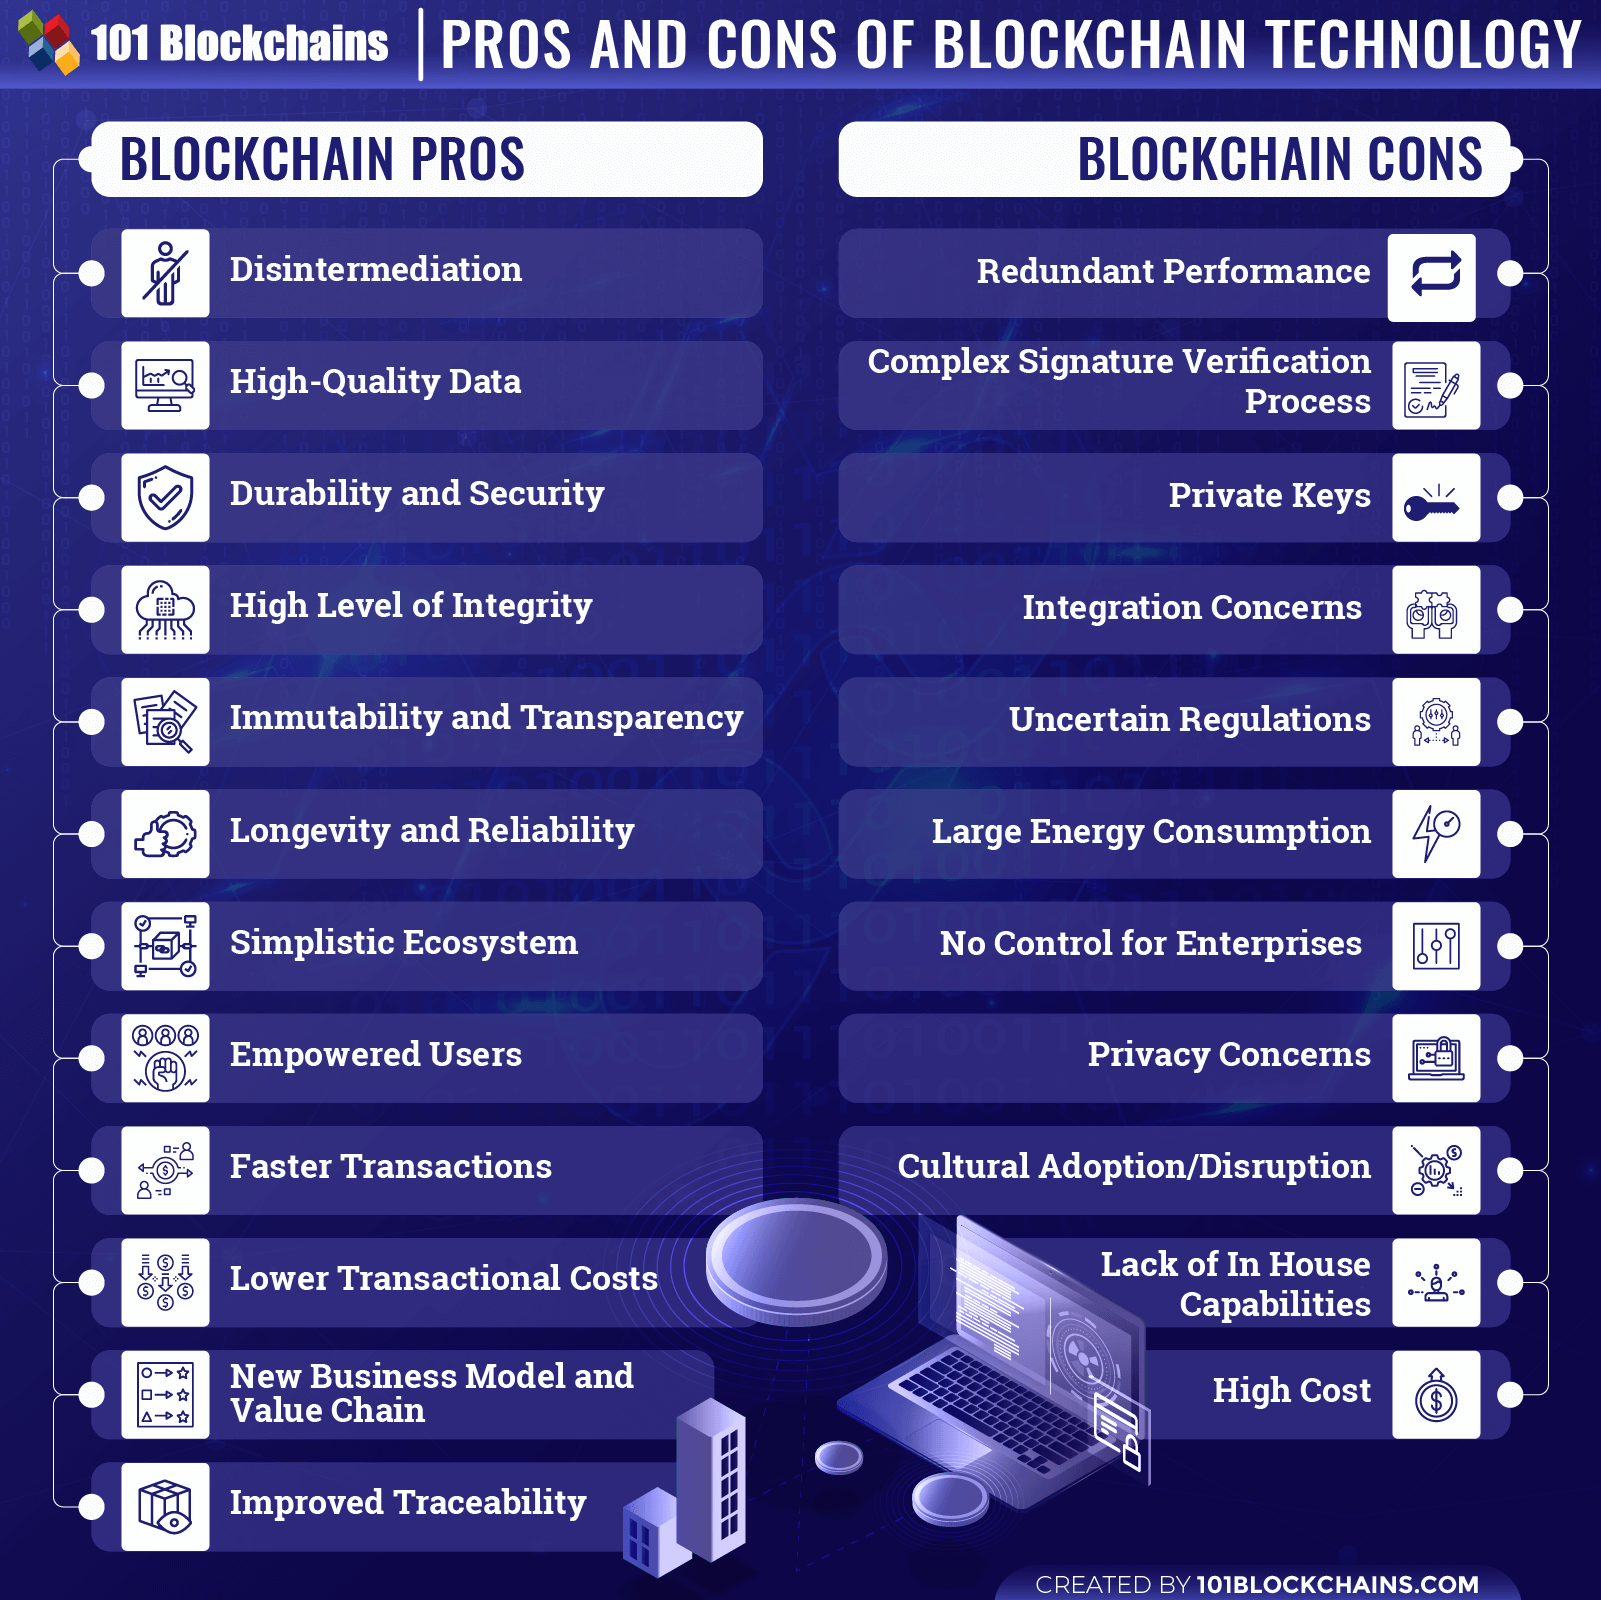 Pros and Cons of Blockchain